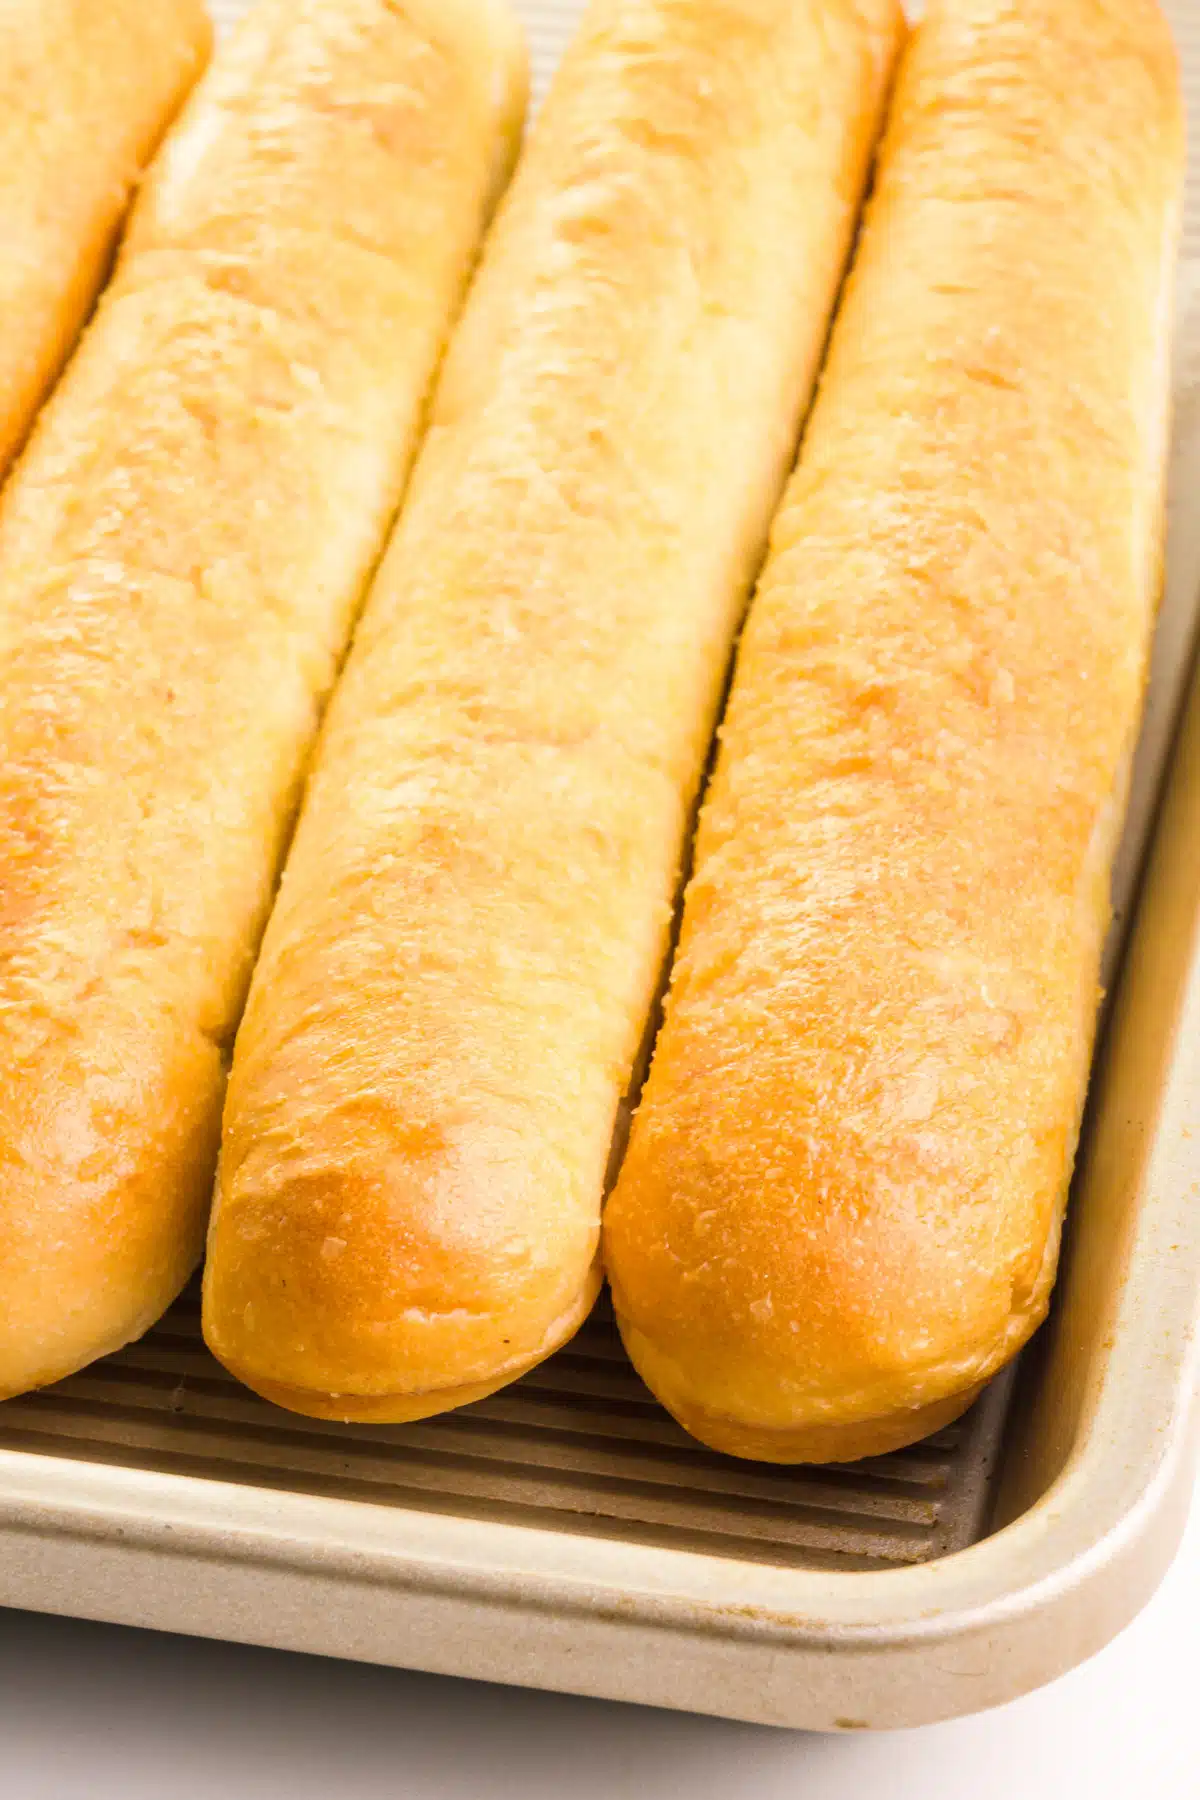 Breadsticks are lined up in a pan, ready to be reheated.